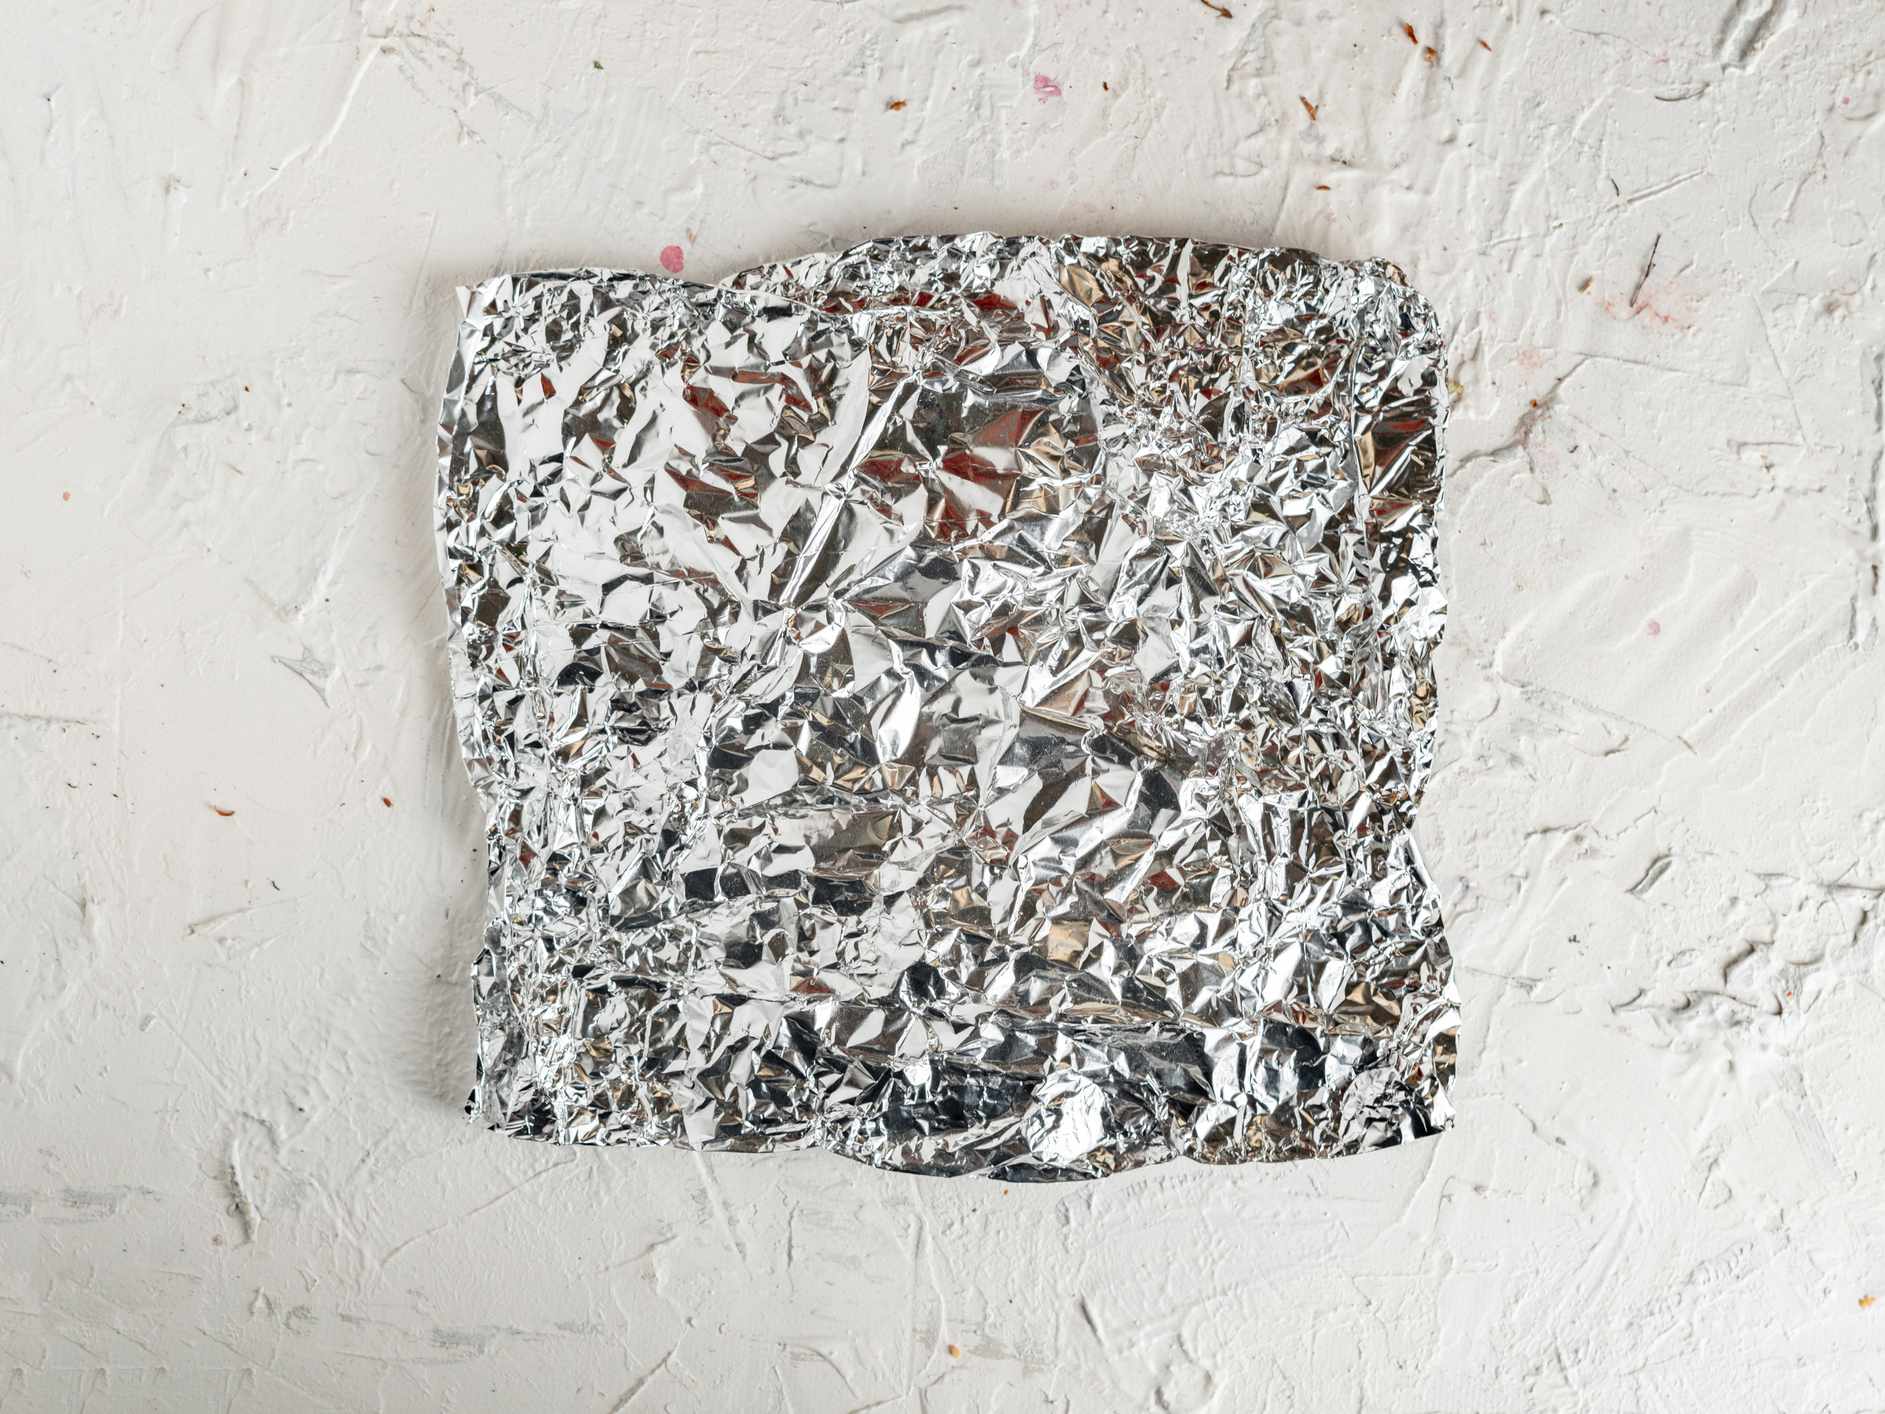 The 3 most dangerous daily sources of aluminum and the damage it does